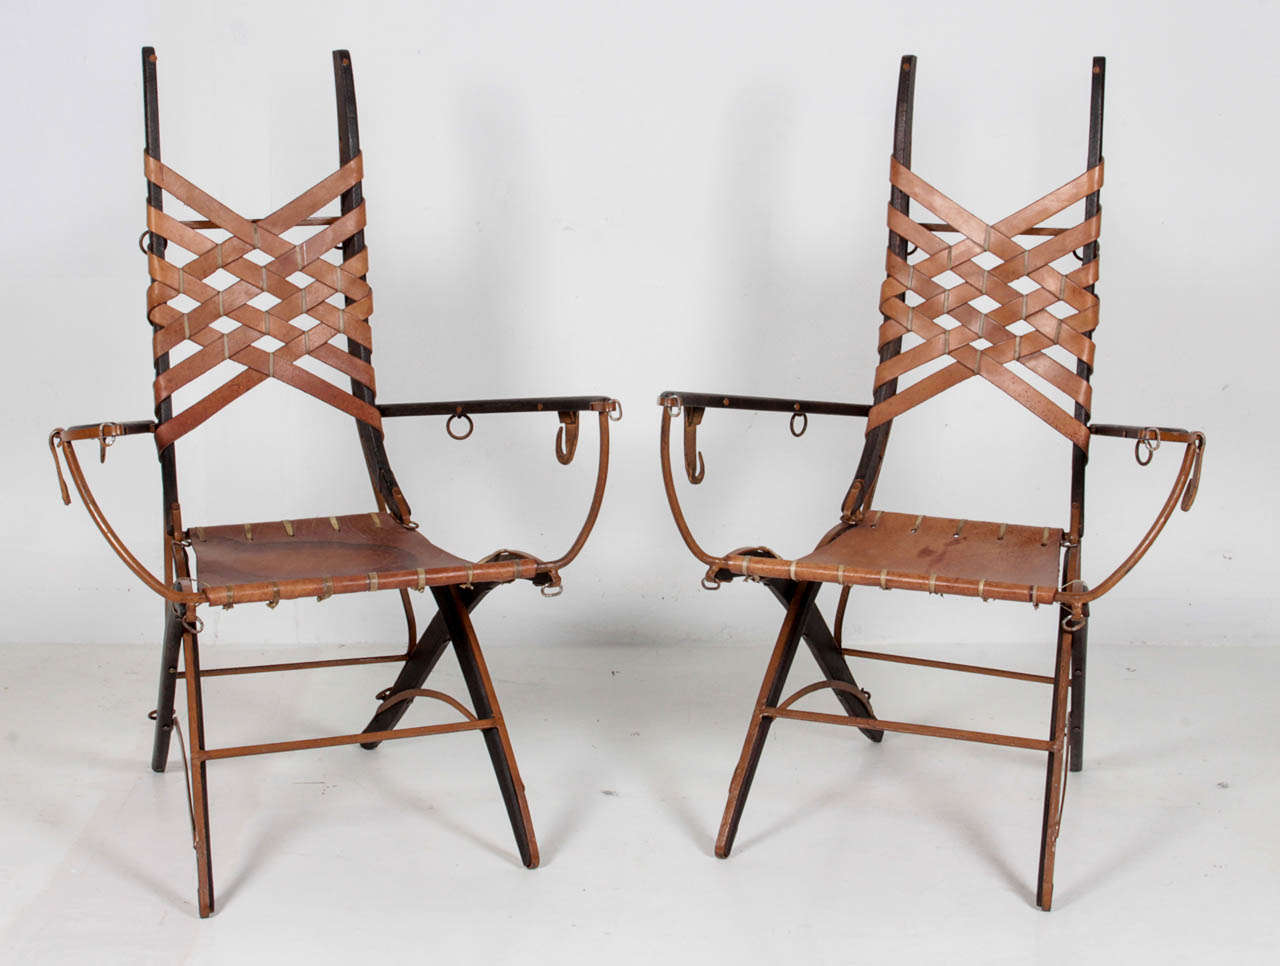 ALBERTO MARCONETTI  Milan, Italy (active Argentina)

Armchairs (Two available) c. 1960's

Oak, painted iron, leather strapwork and seat

Marks:  by Alberto Marconetti  (script signature)

H: 40 1/2”  x  W:  27”  x D: 21”
Seat height: 19